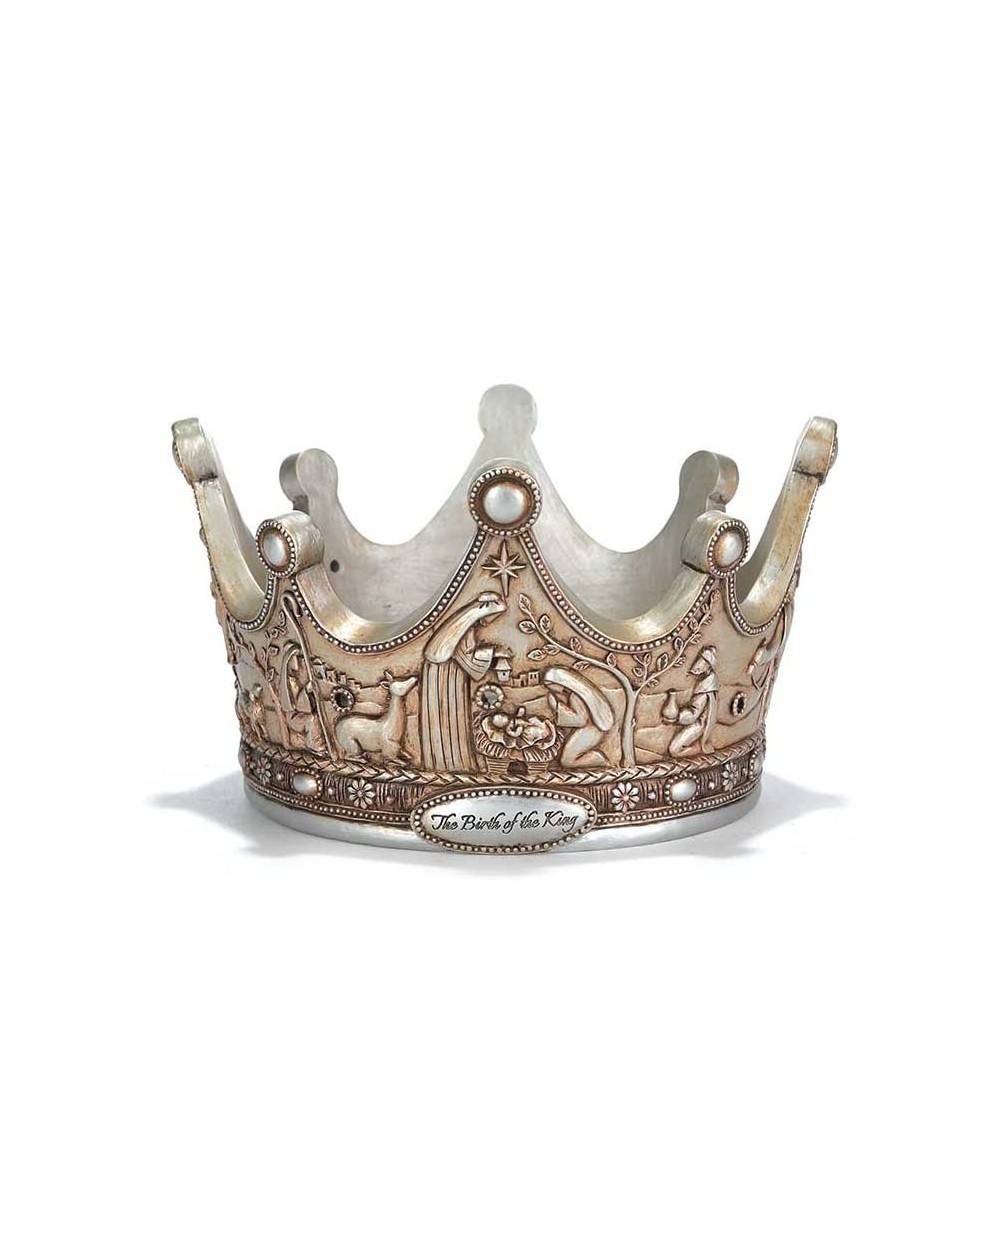 Candleholders The Birth of The King Crown Brushed Silver Tone 7 x 5 Resin Christmas Advent Candle Holder - CY11PXSDXC3 $62.74